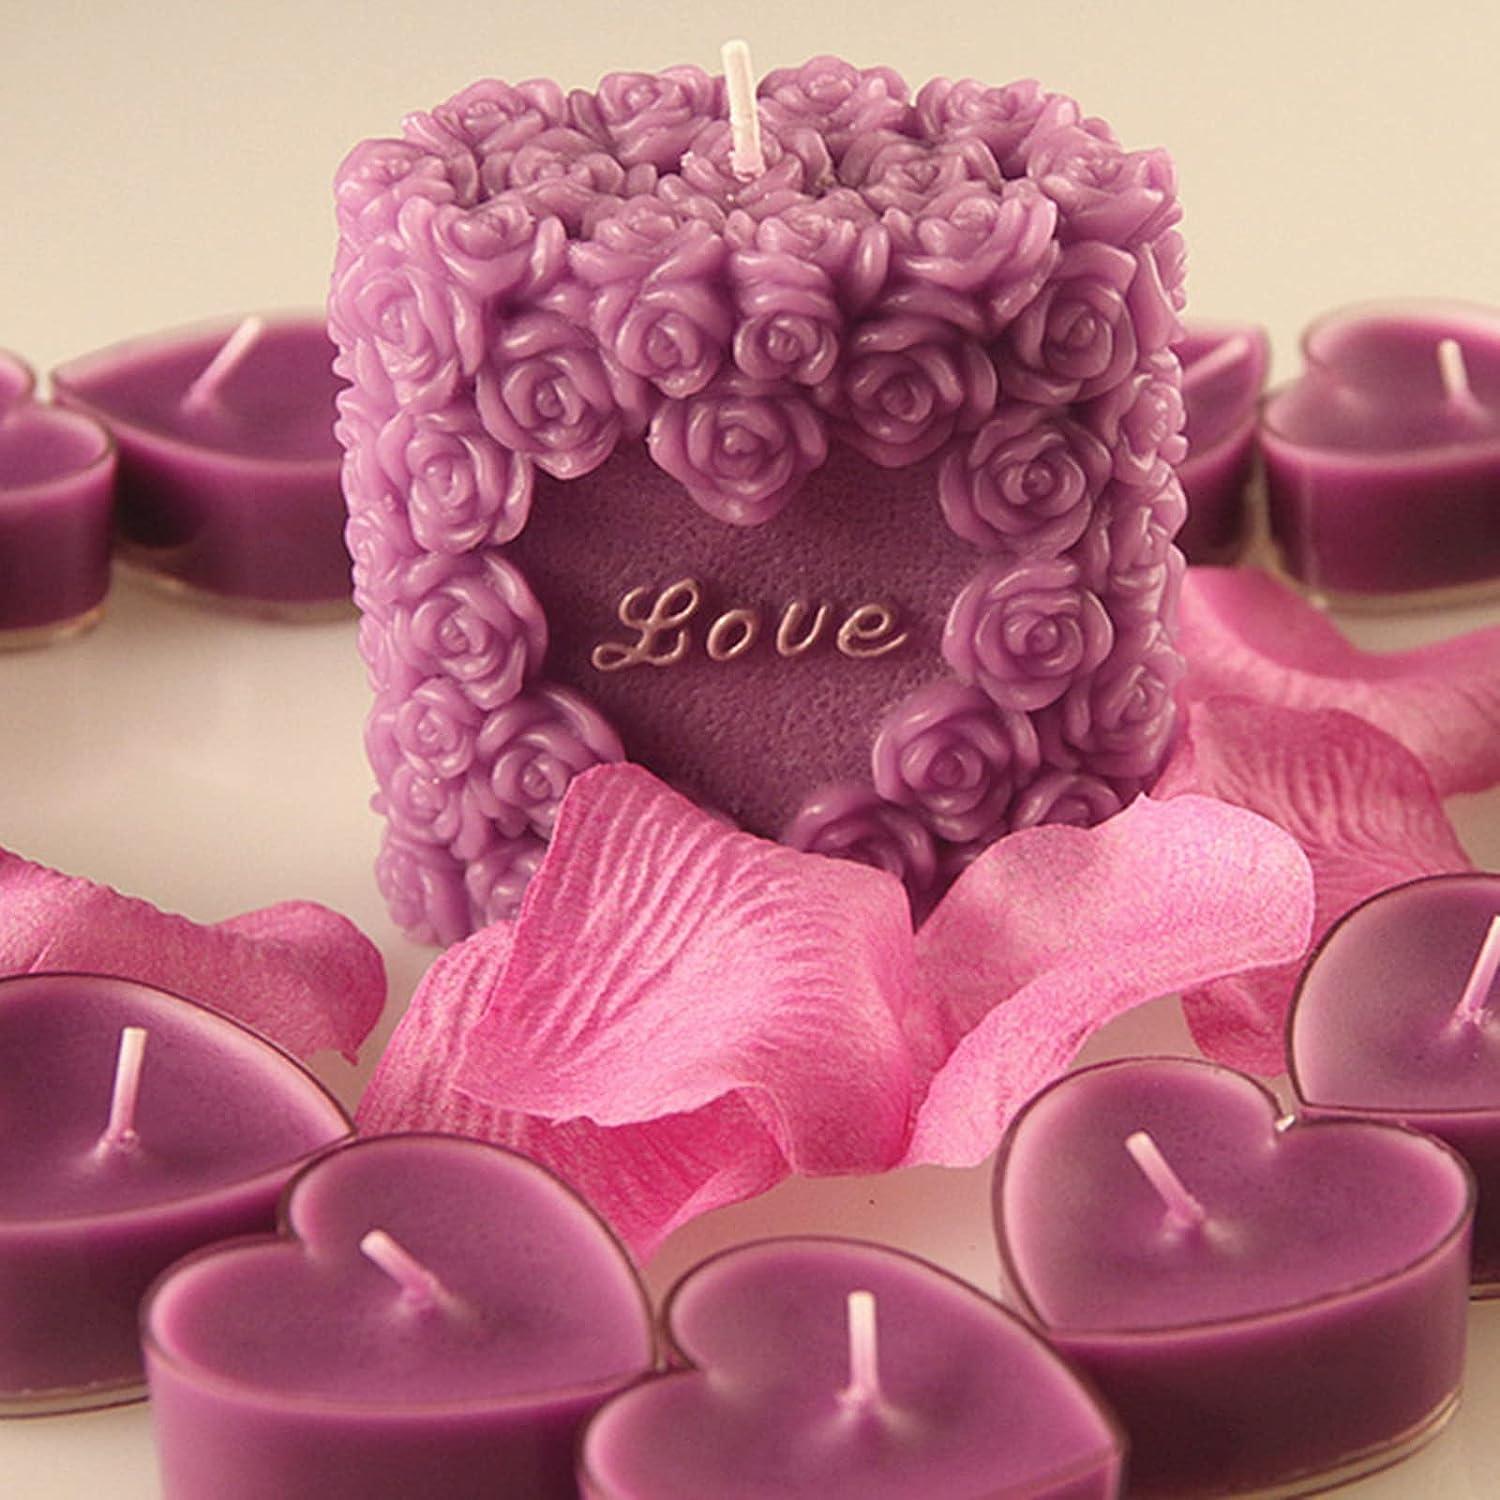 Heart Rose Silicone Candle Mold Kiss Love Soap Resin Mould DIY Chocolate  Making Valentine's Day Gifts Wedding Cake Party Decor